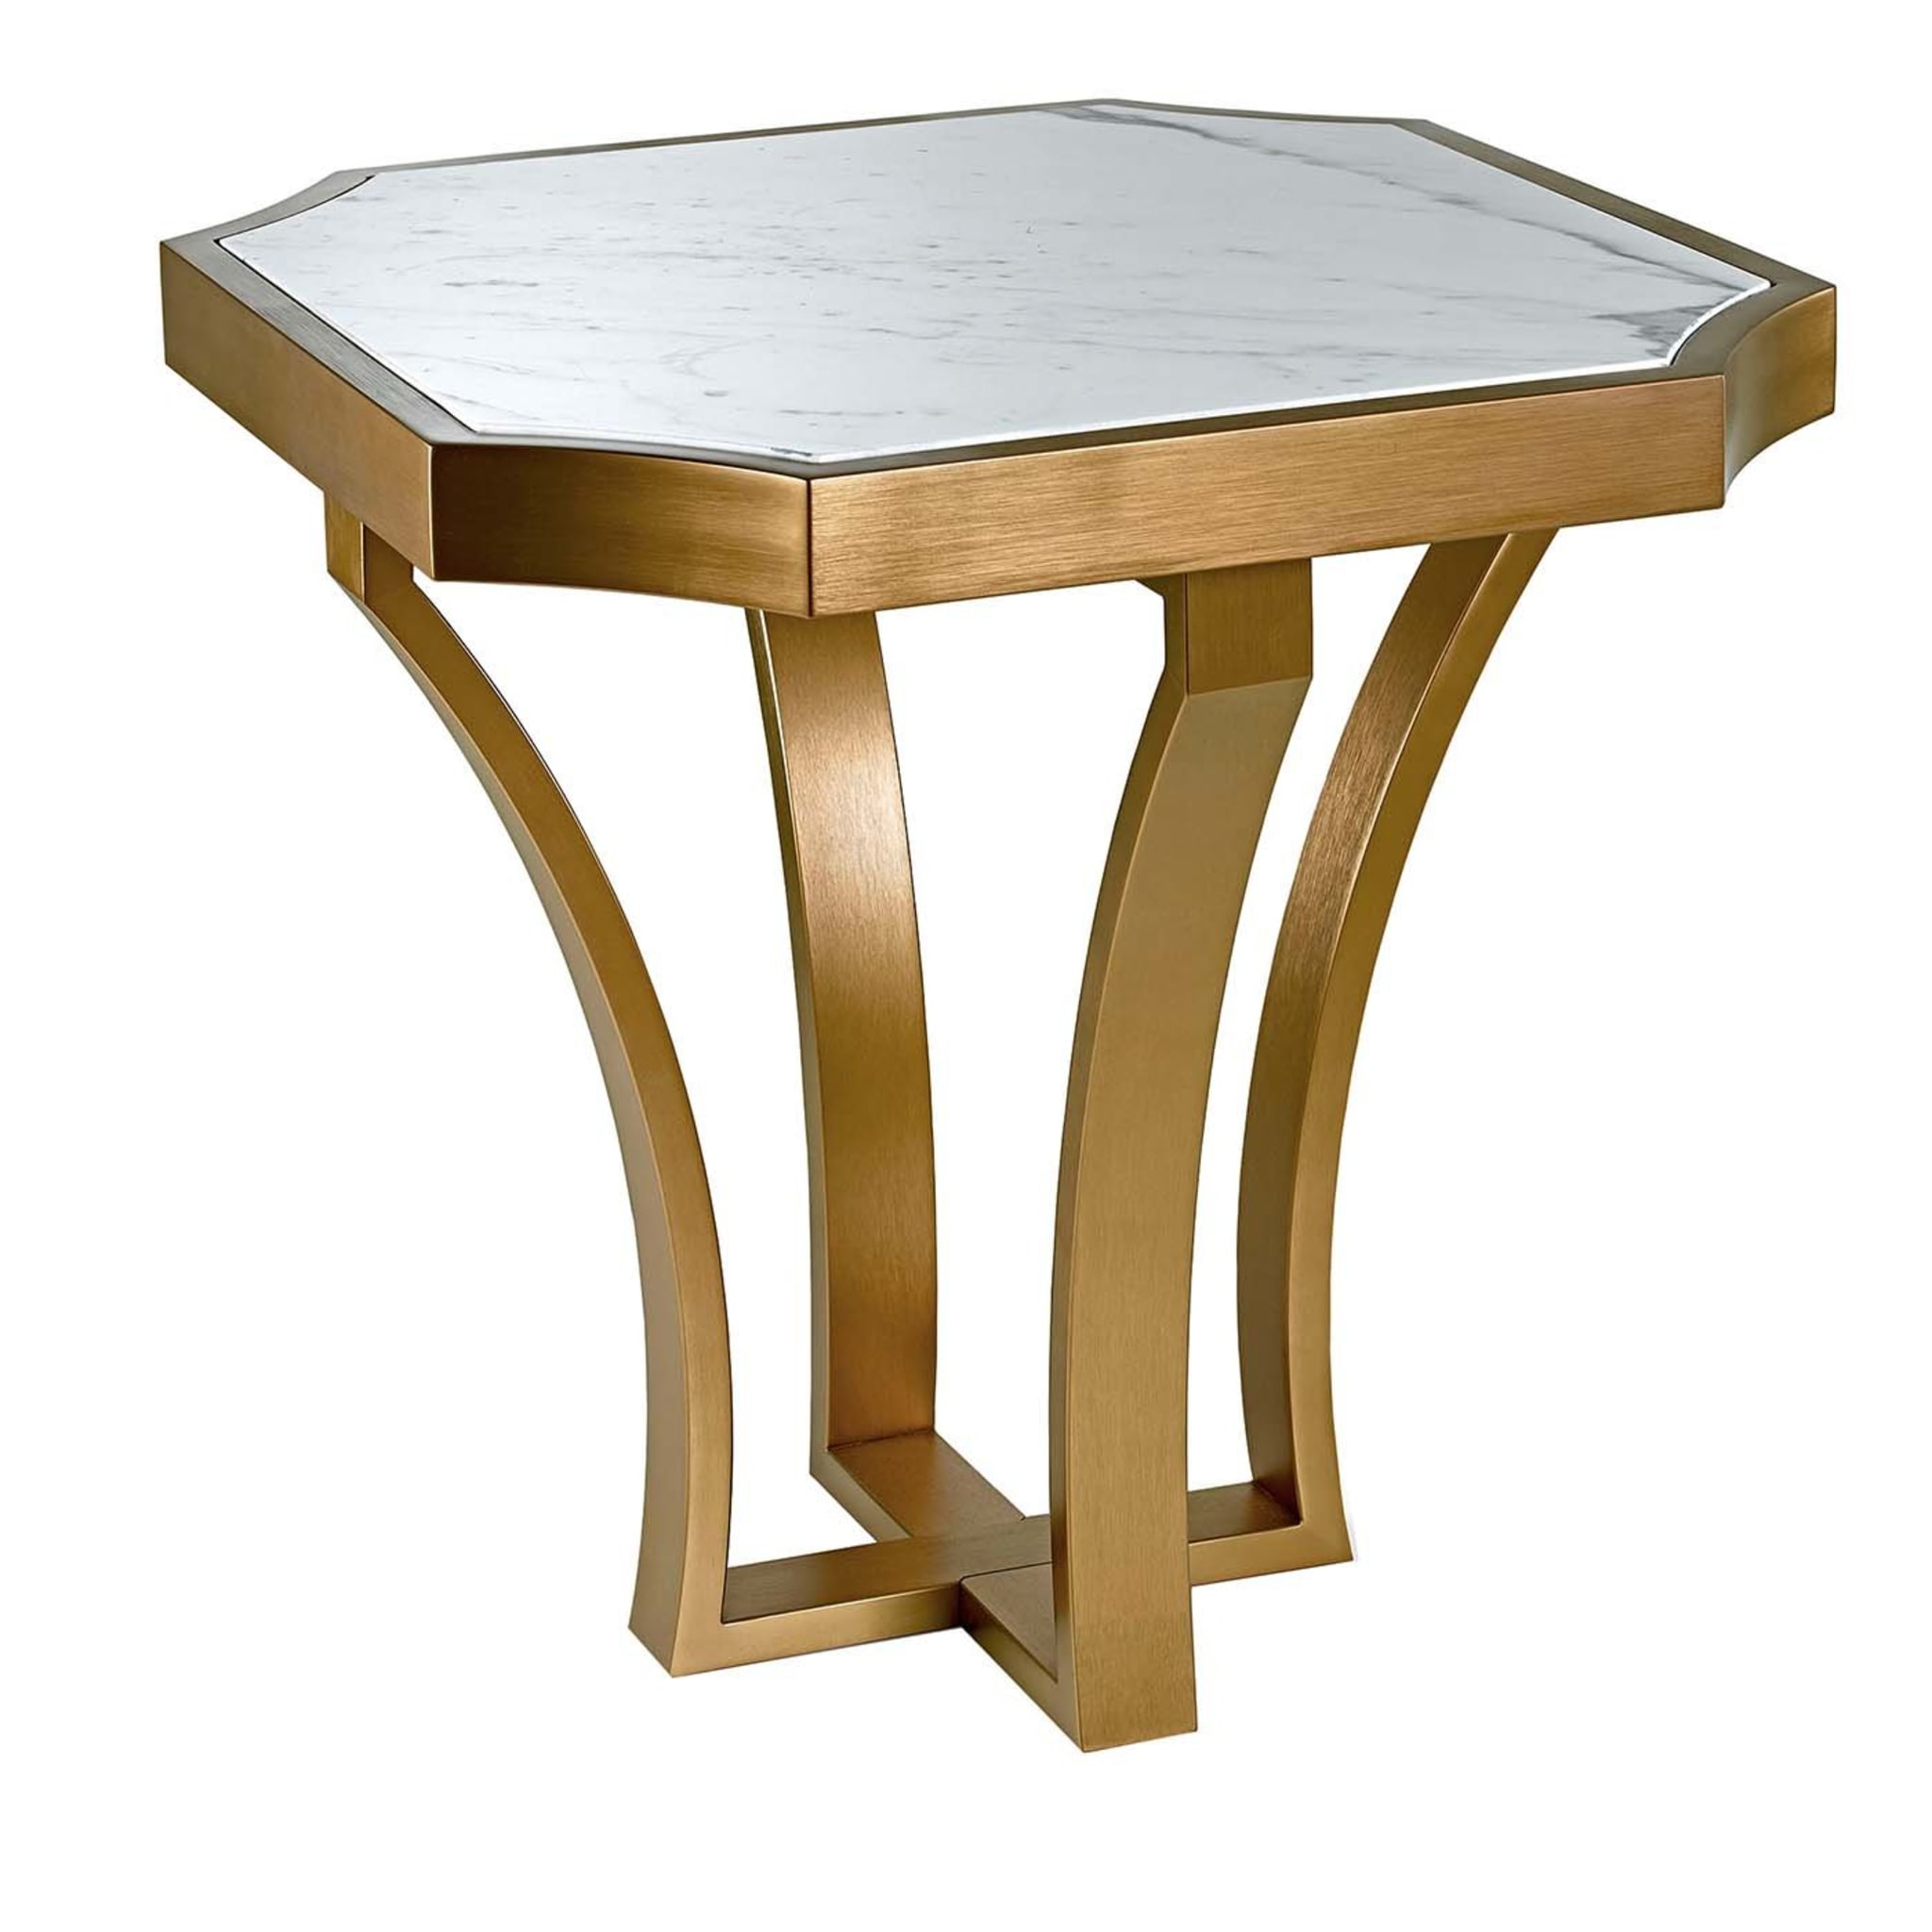 Savoy Side Table - Main view